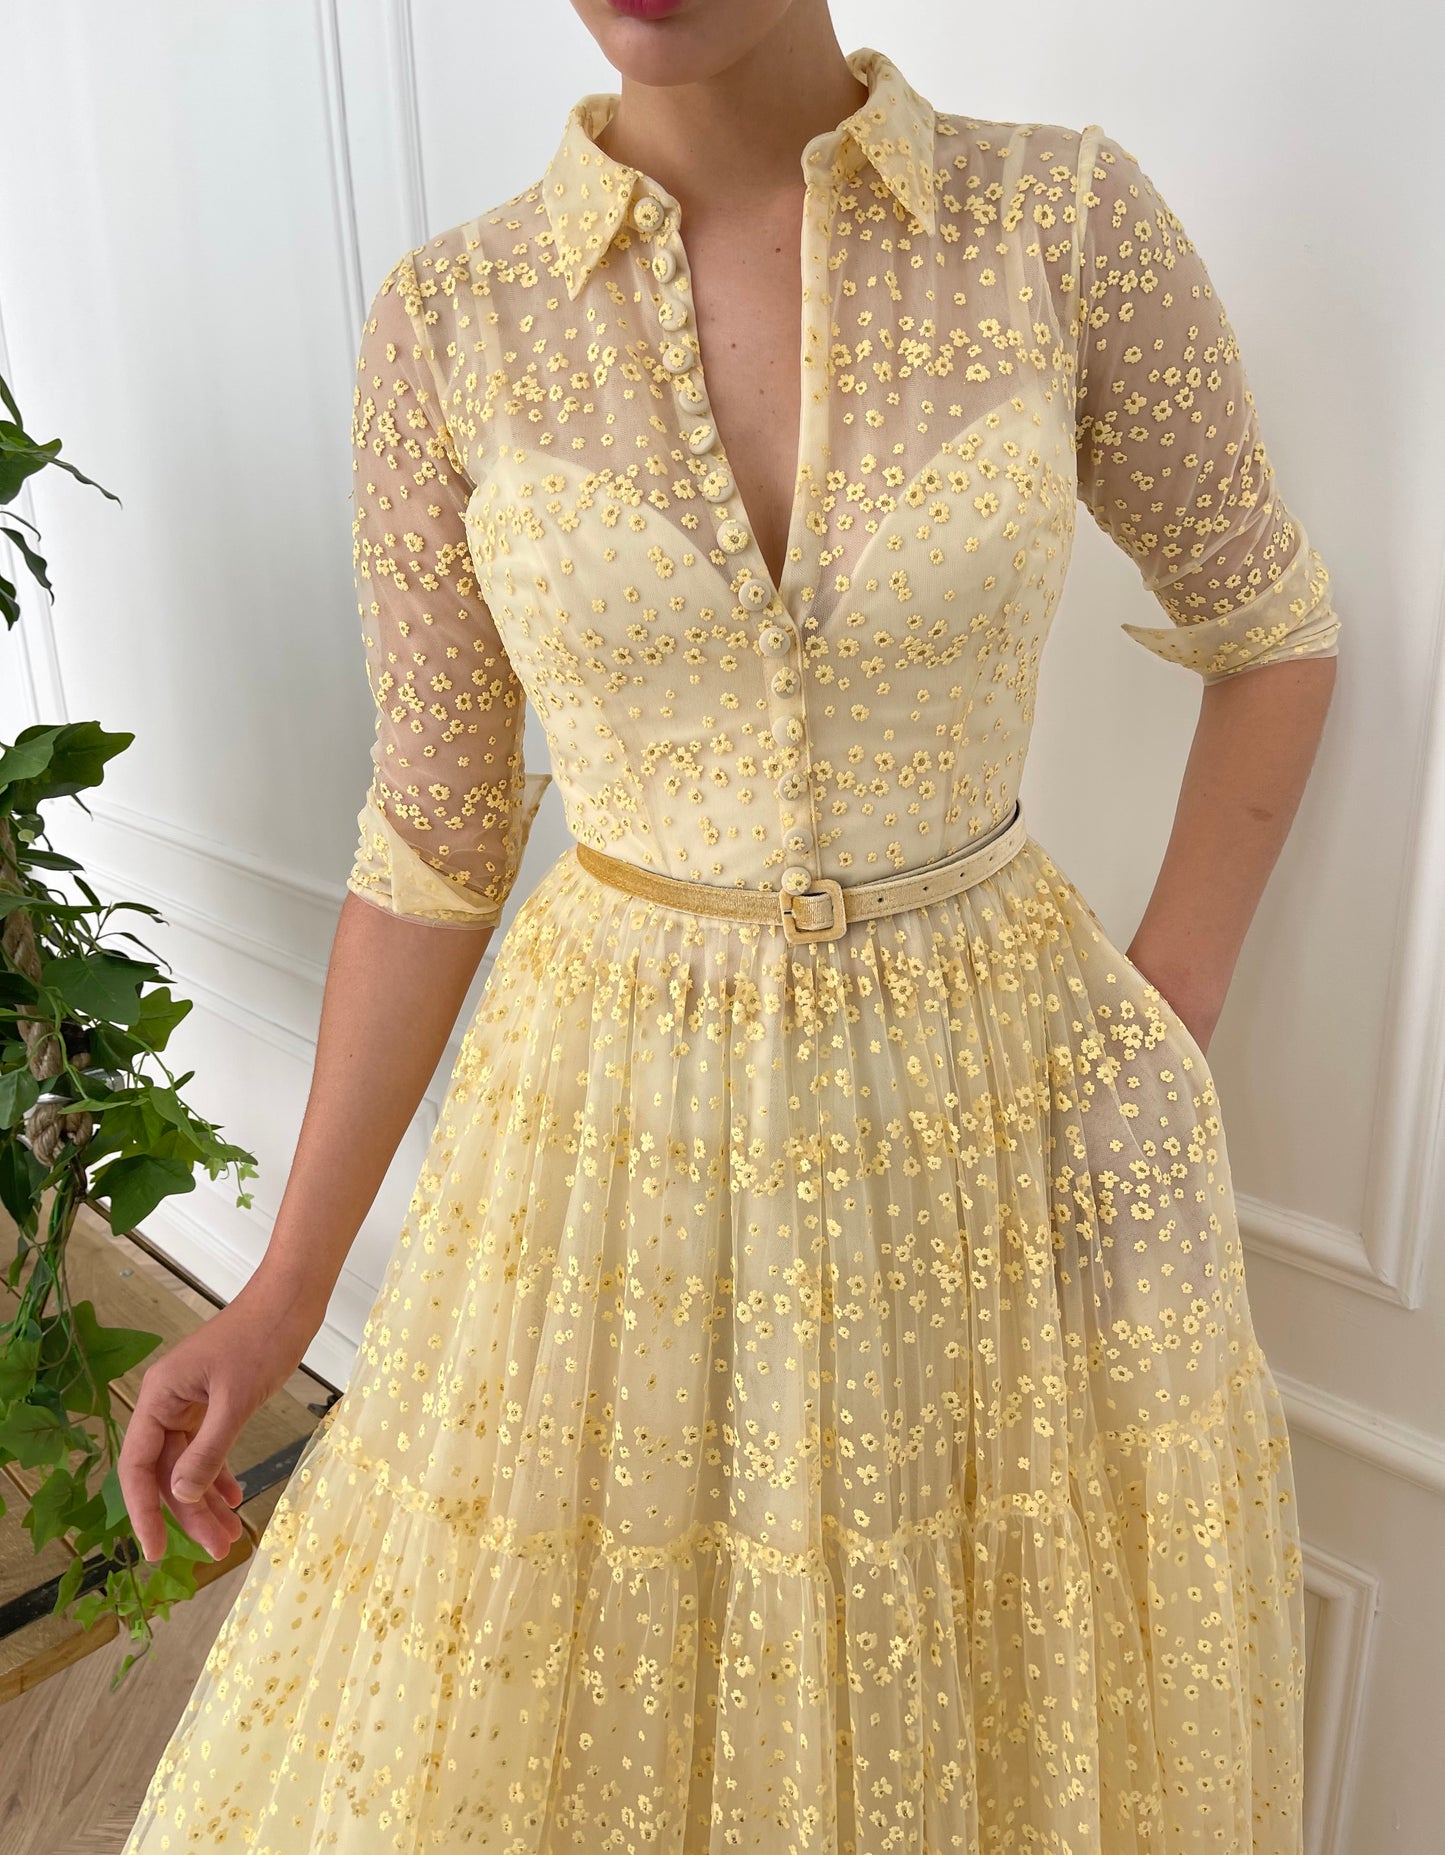 Yellow A-Line dress with short sleeves and belt